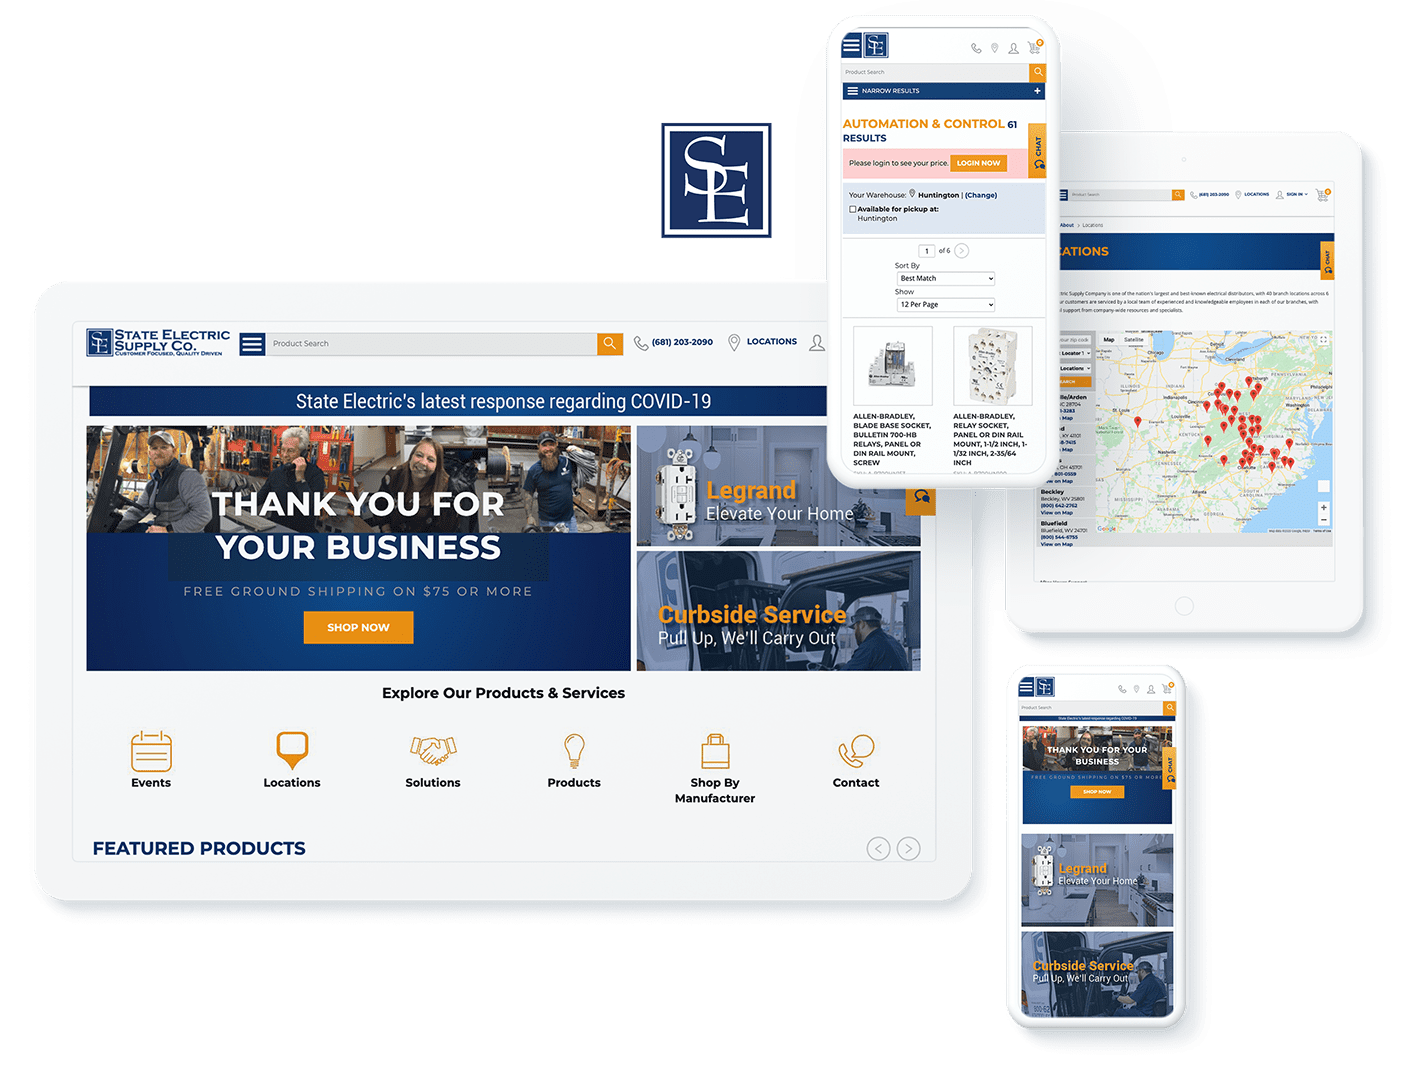 State Electric Supply Co website design and development